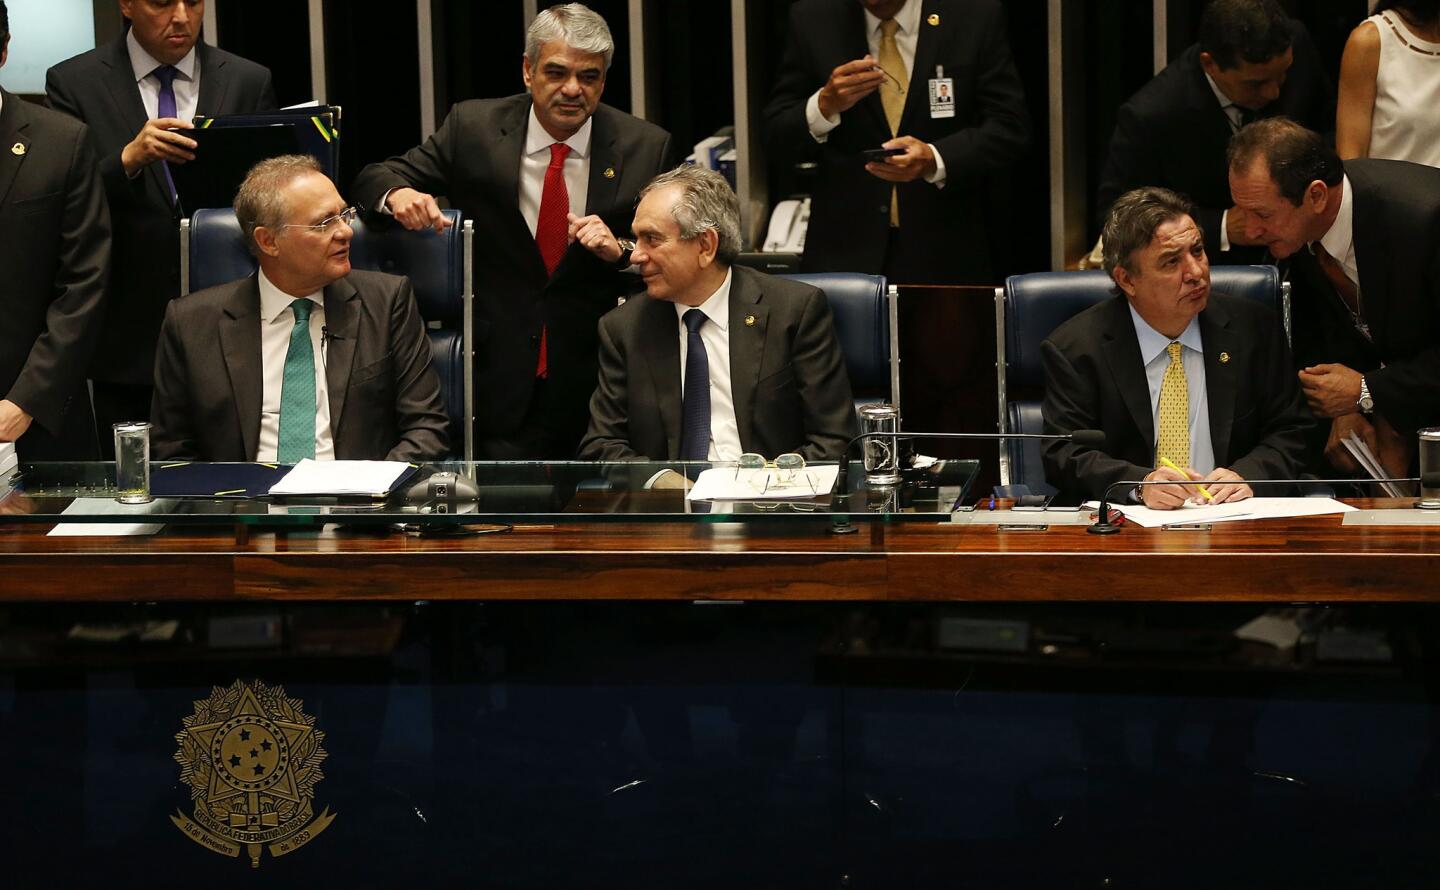 Brazilian Senate President Renan Calheiros, left, sits with other lawmakers during a special session in the Brazilian Senate to vote on whether to accept impeachment charges against embattled President Dilma Rousseff in Brasilia.